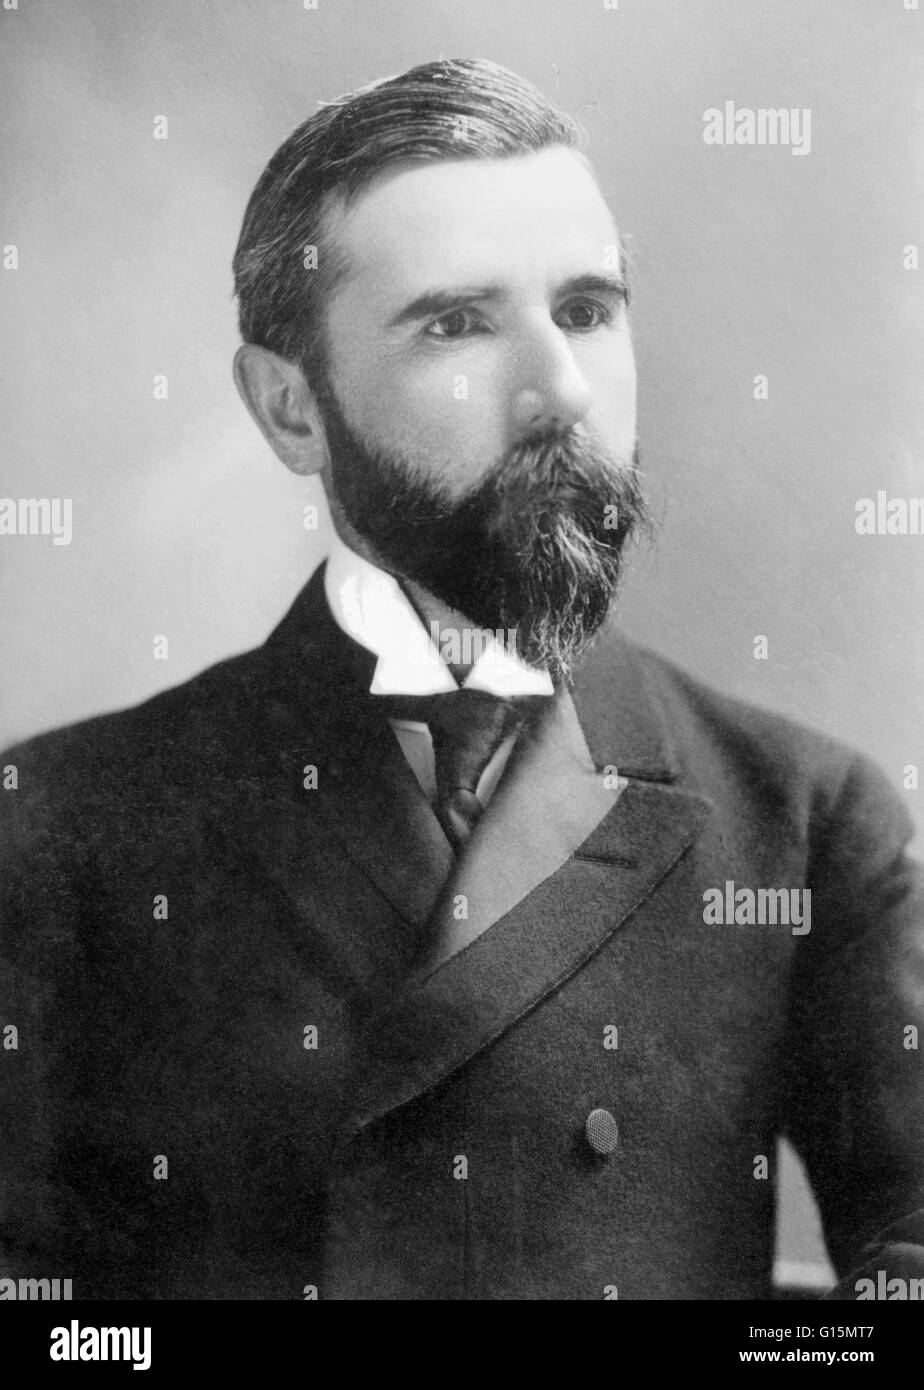 Russell Henry Chittenden (February 18, 1856 - December 26, 1943) was an American physiological chemist. He conducted pioneering research in the biochemistry of digestion and nutrition. He was professor of physiological chemistry at Yale from 1882 to 1922 Stock Photo